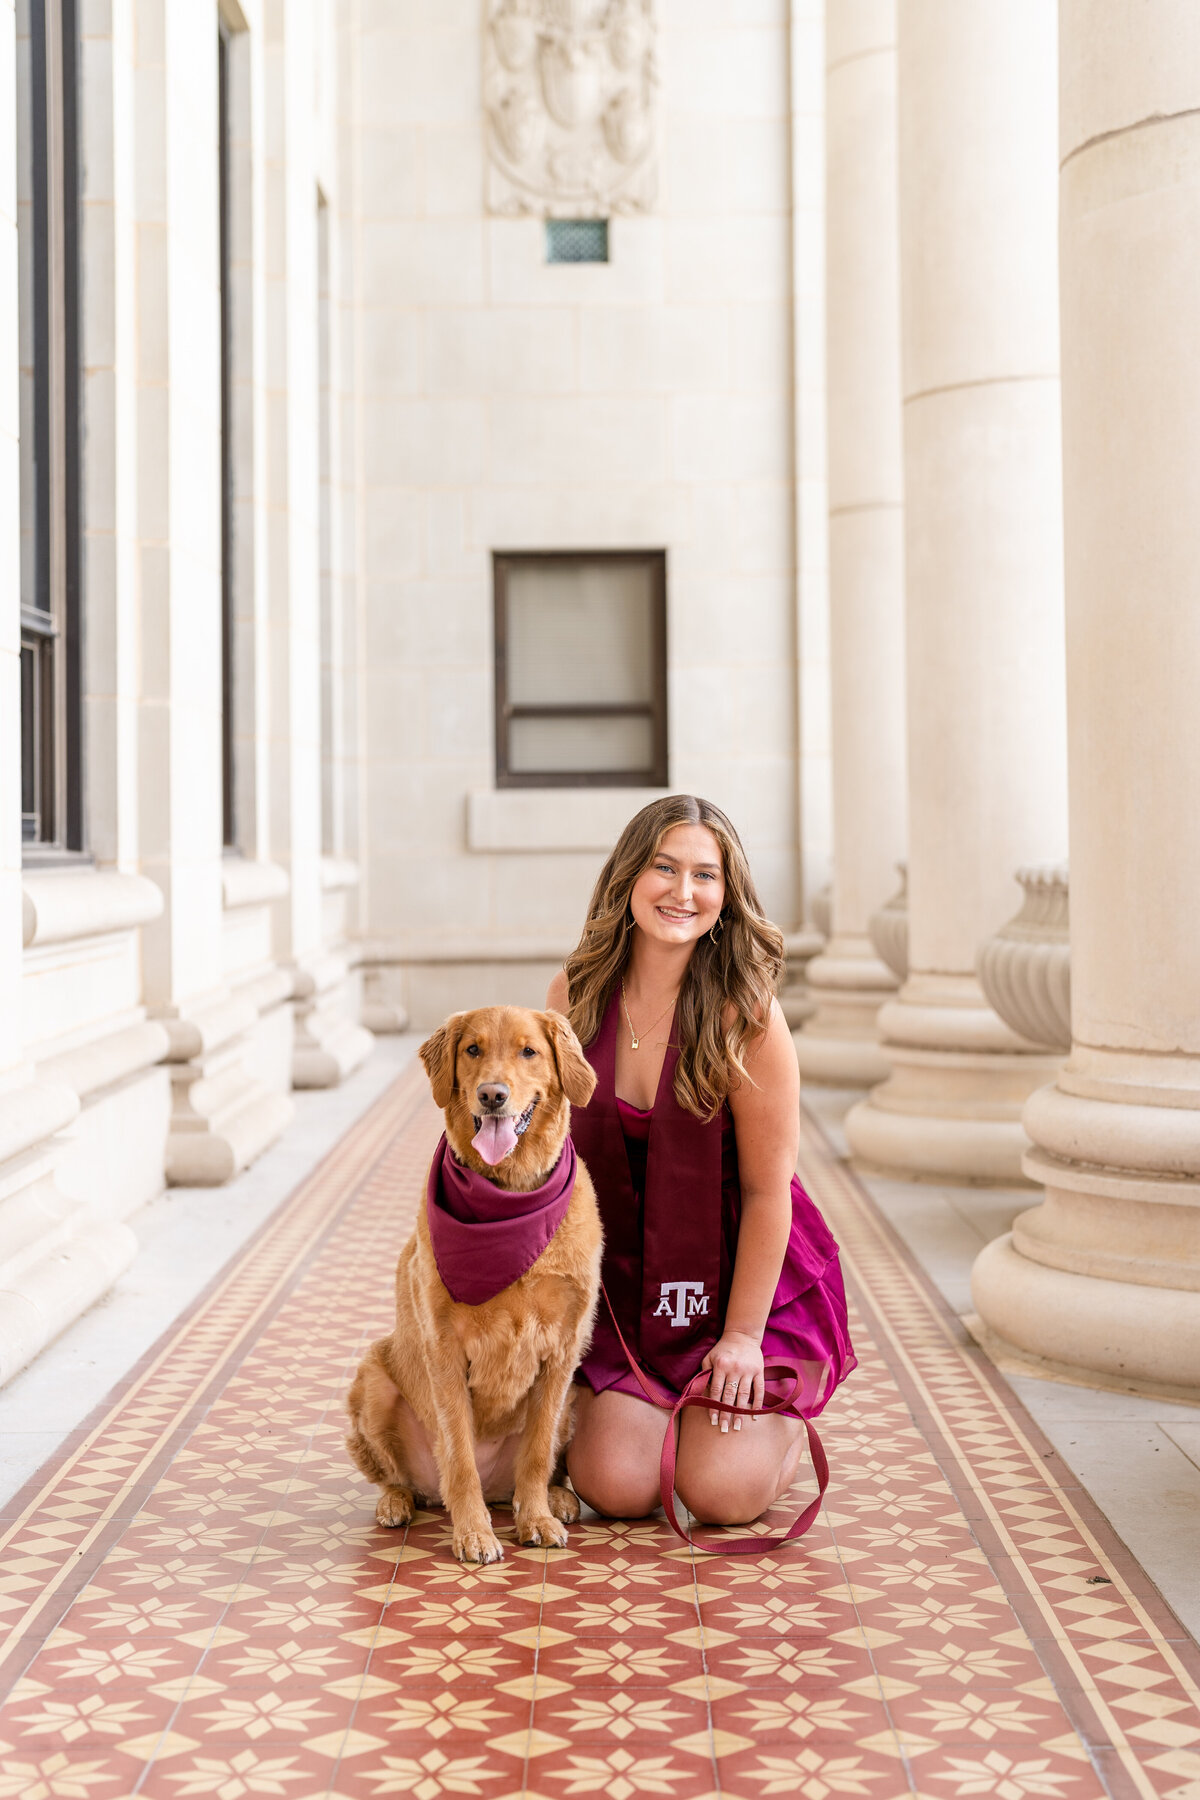 Texas A&M senior girl kneeling next to dog while wearing maroon dress and Aggie stole in the columns of the Administration Building